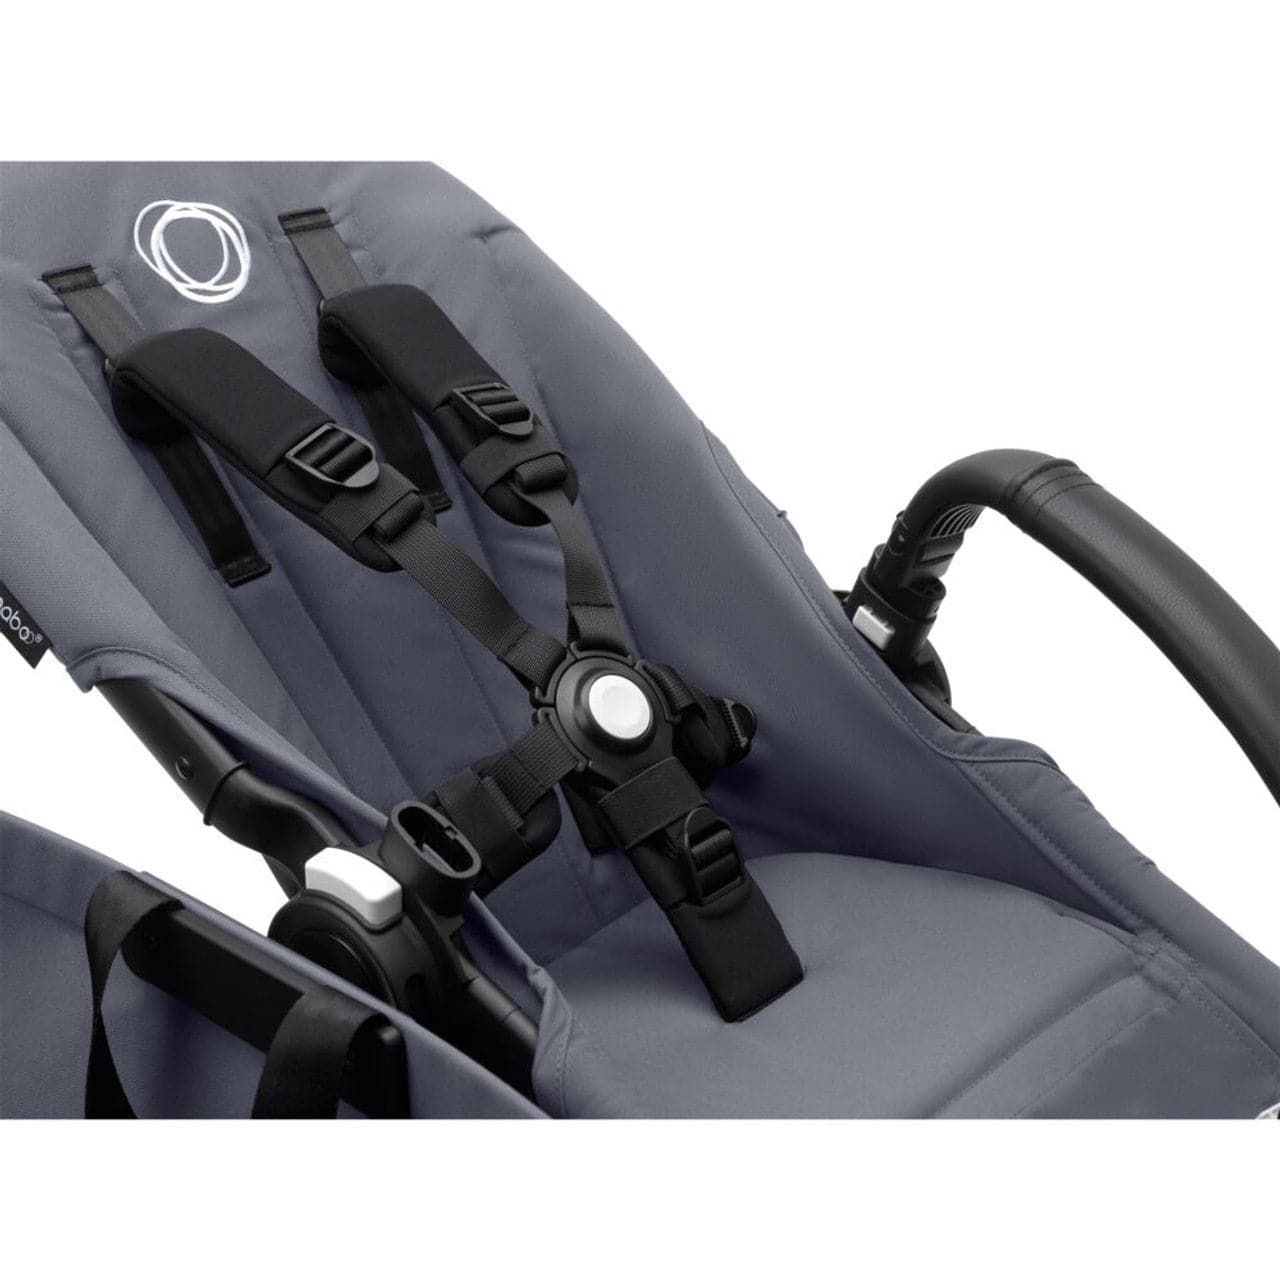 Bugaboo Donkey 5 Duo Pushchair on Graphite/Grey Chassis - Choose Your Colour - For Your Little One